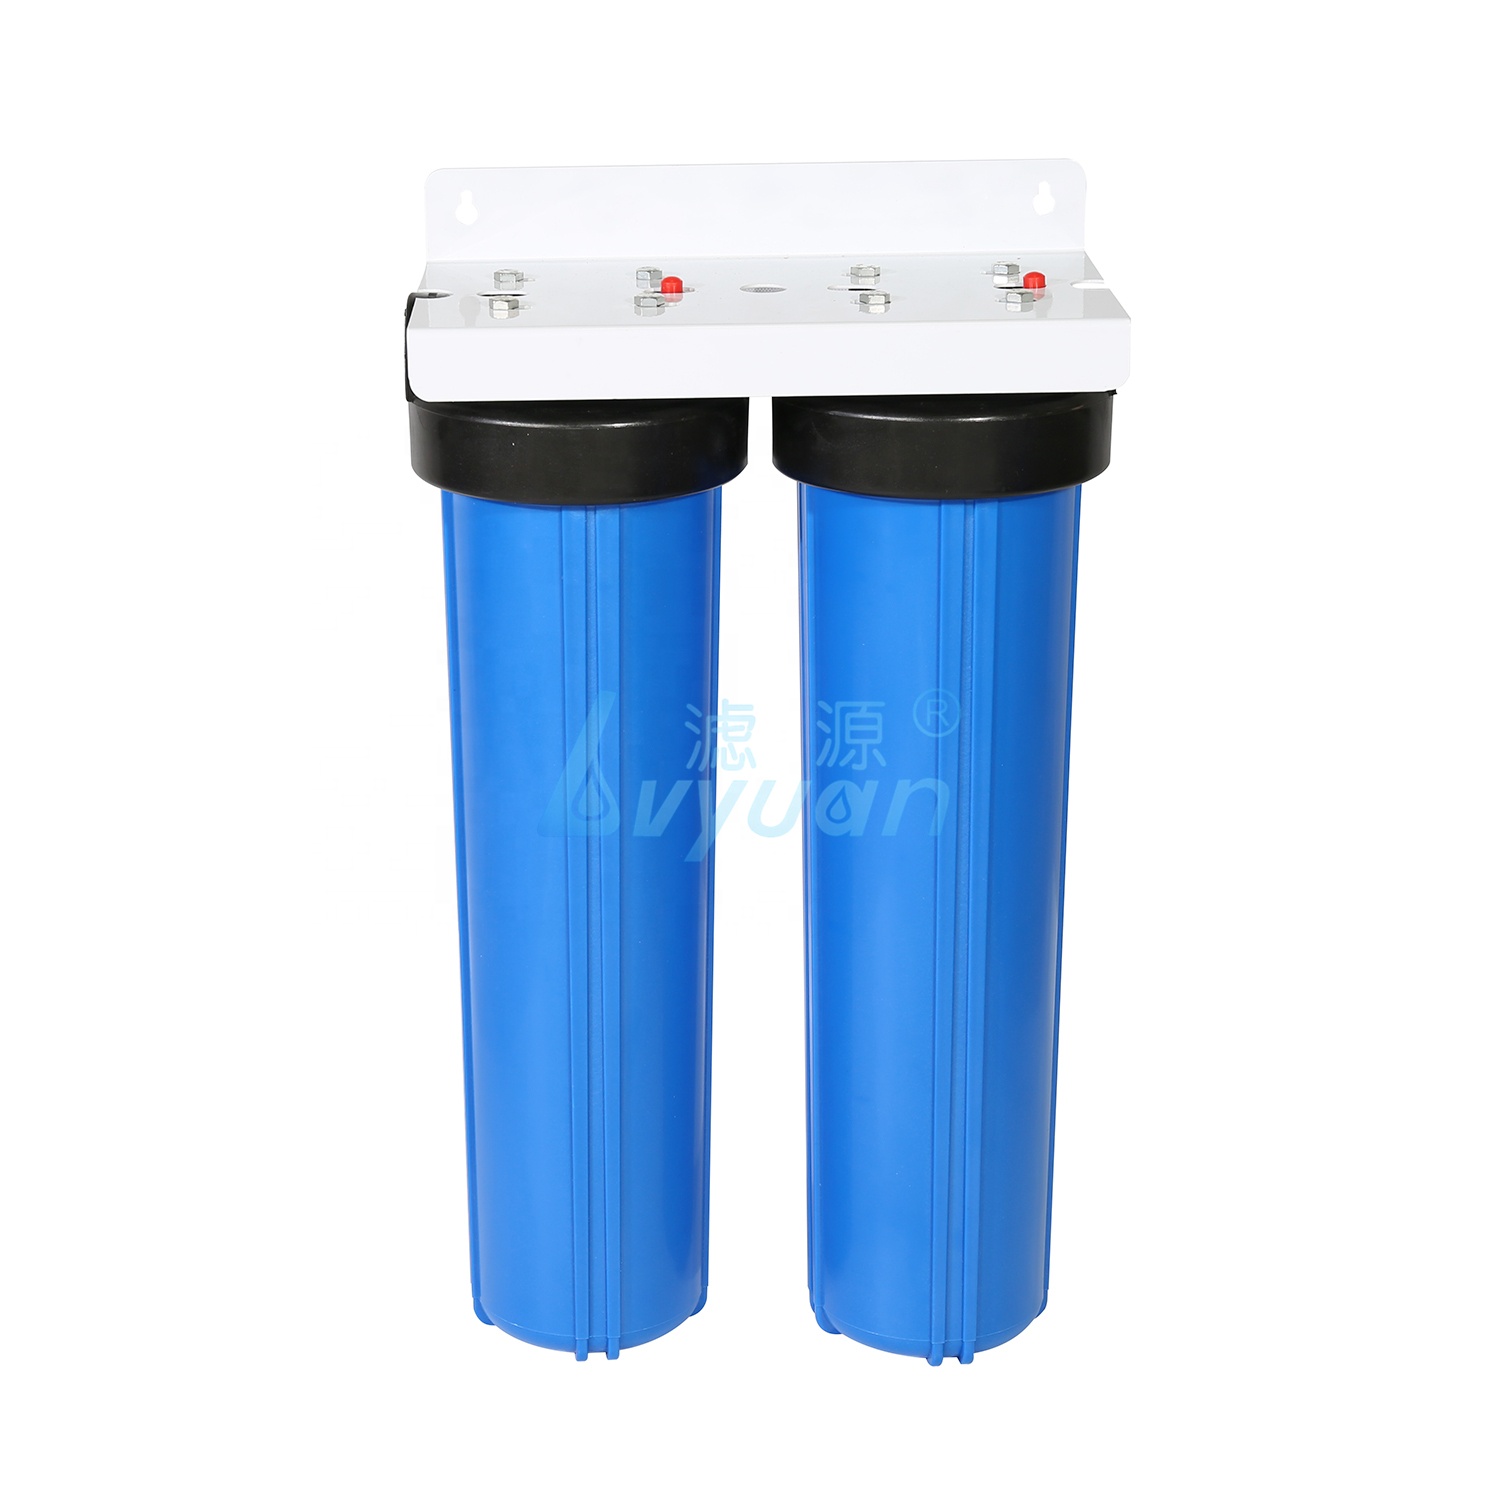 Prefiltration 1 2 3 stage 10 20 inch big blue water filter housing for water treatment